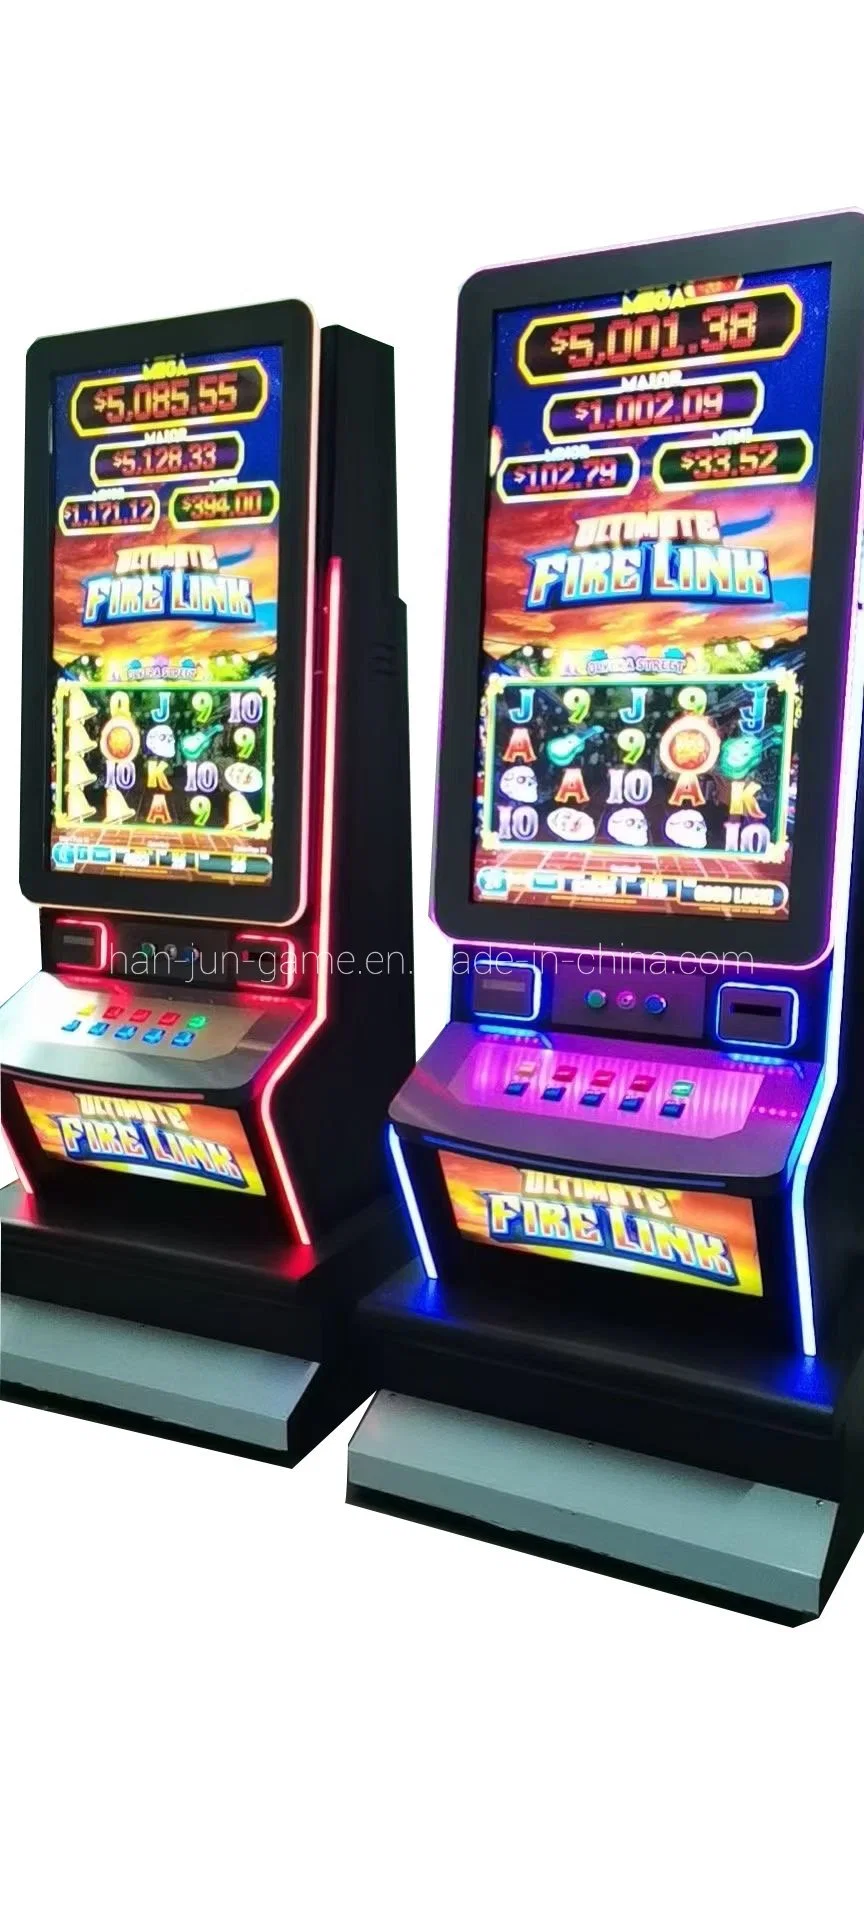 Wholesale Multi- Game Ultimate Fire Link 8 in 1 Gambling Video Game Machine